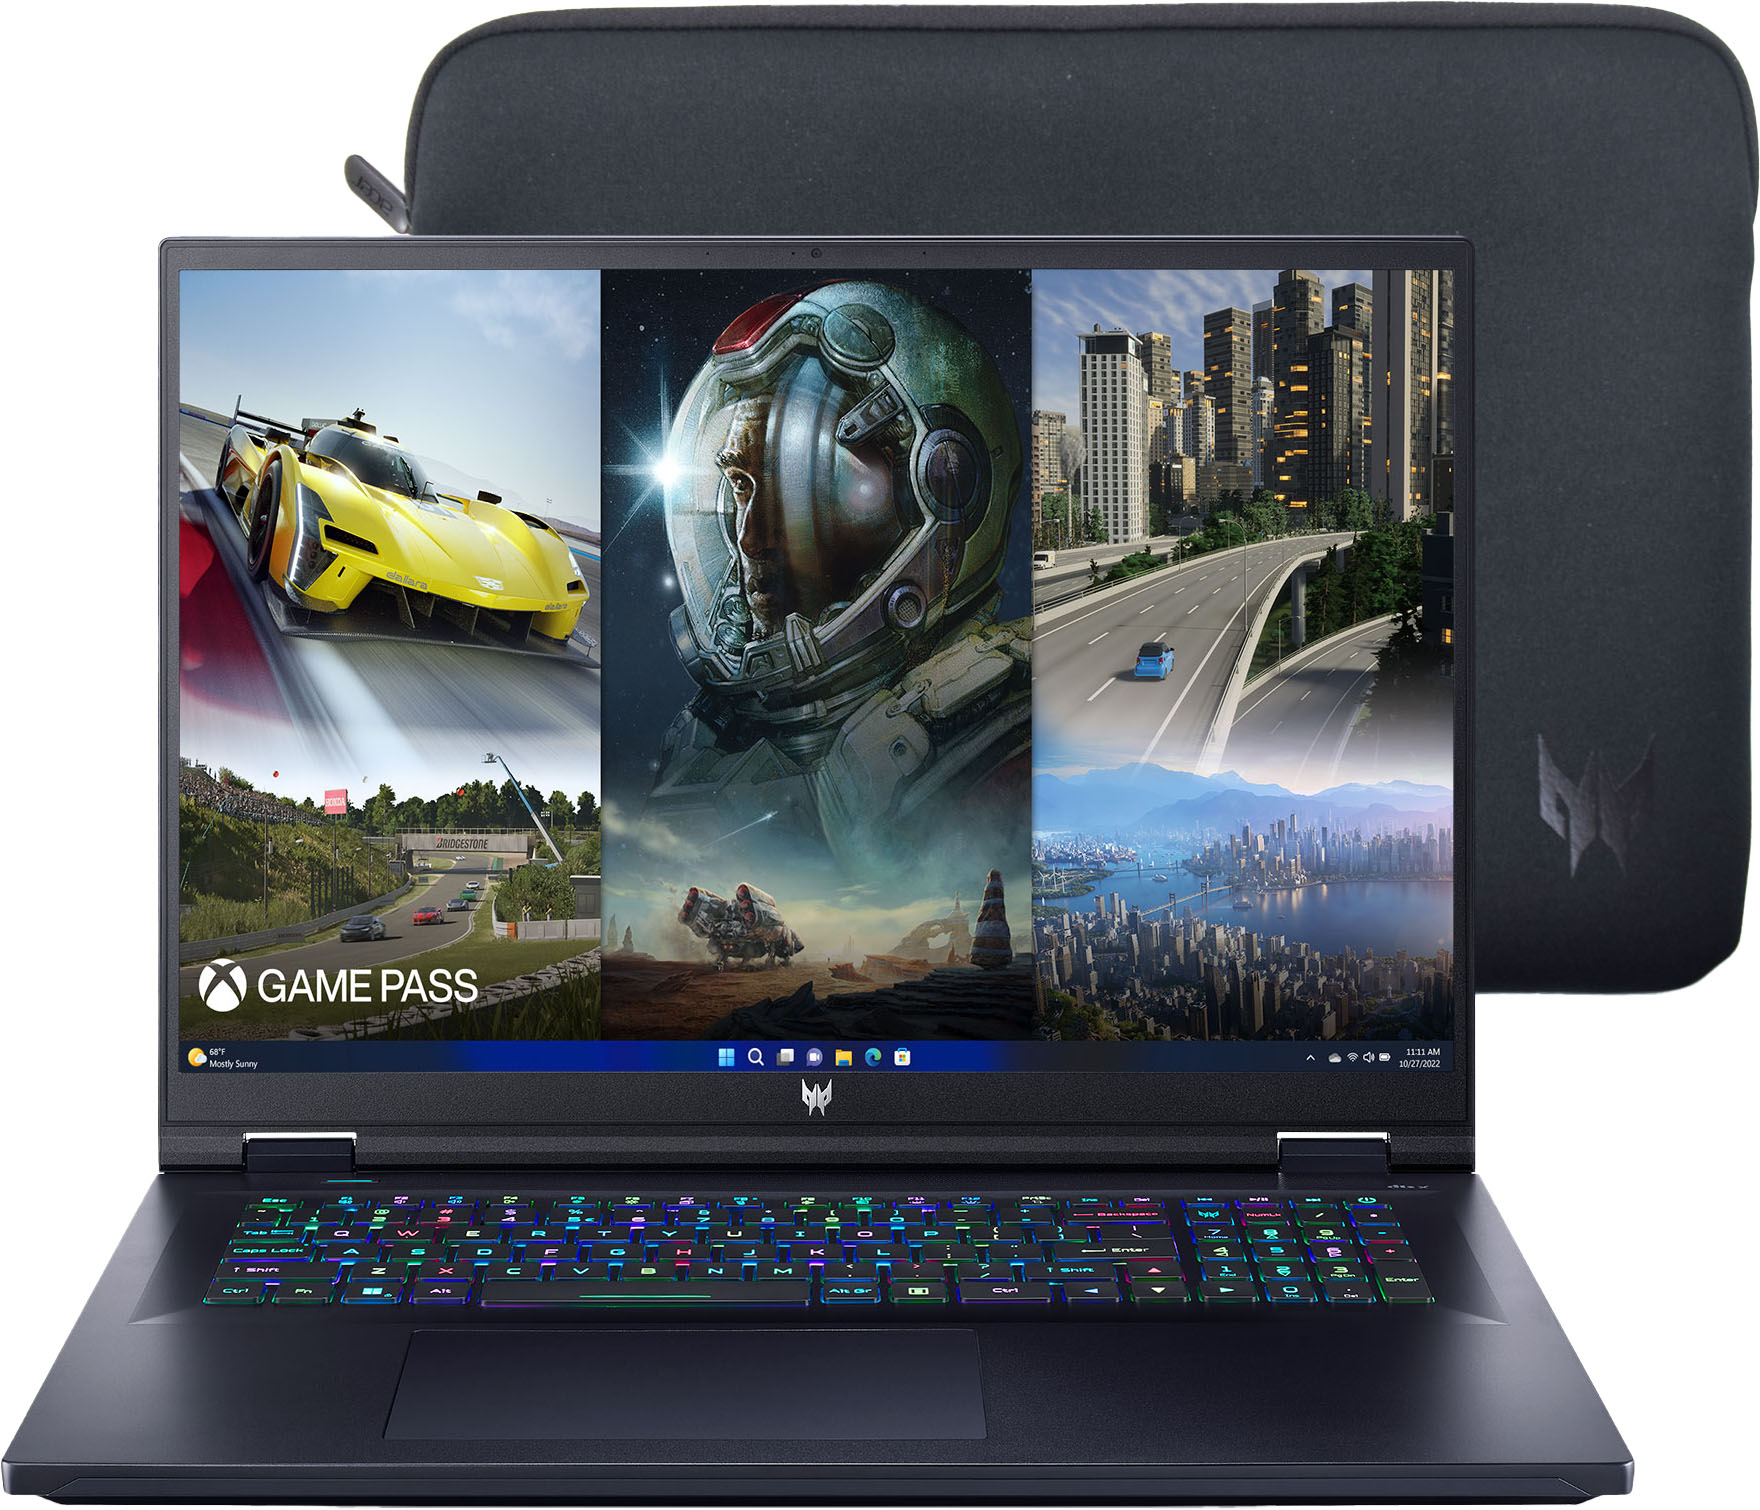 Acer's Newest Gaming Laptops Have Huge 16- and 18-inch Display